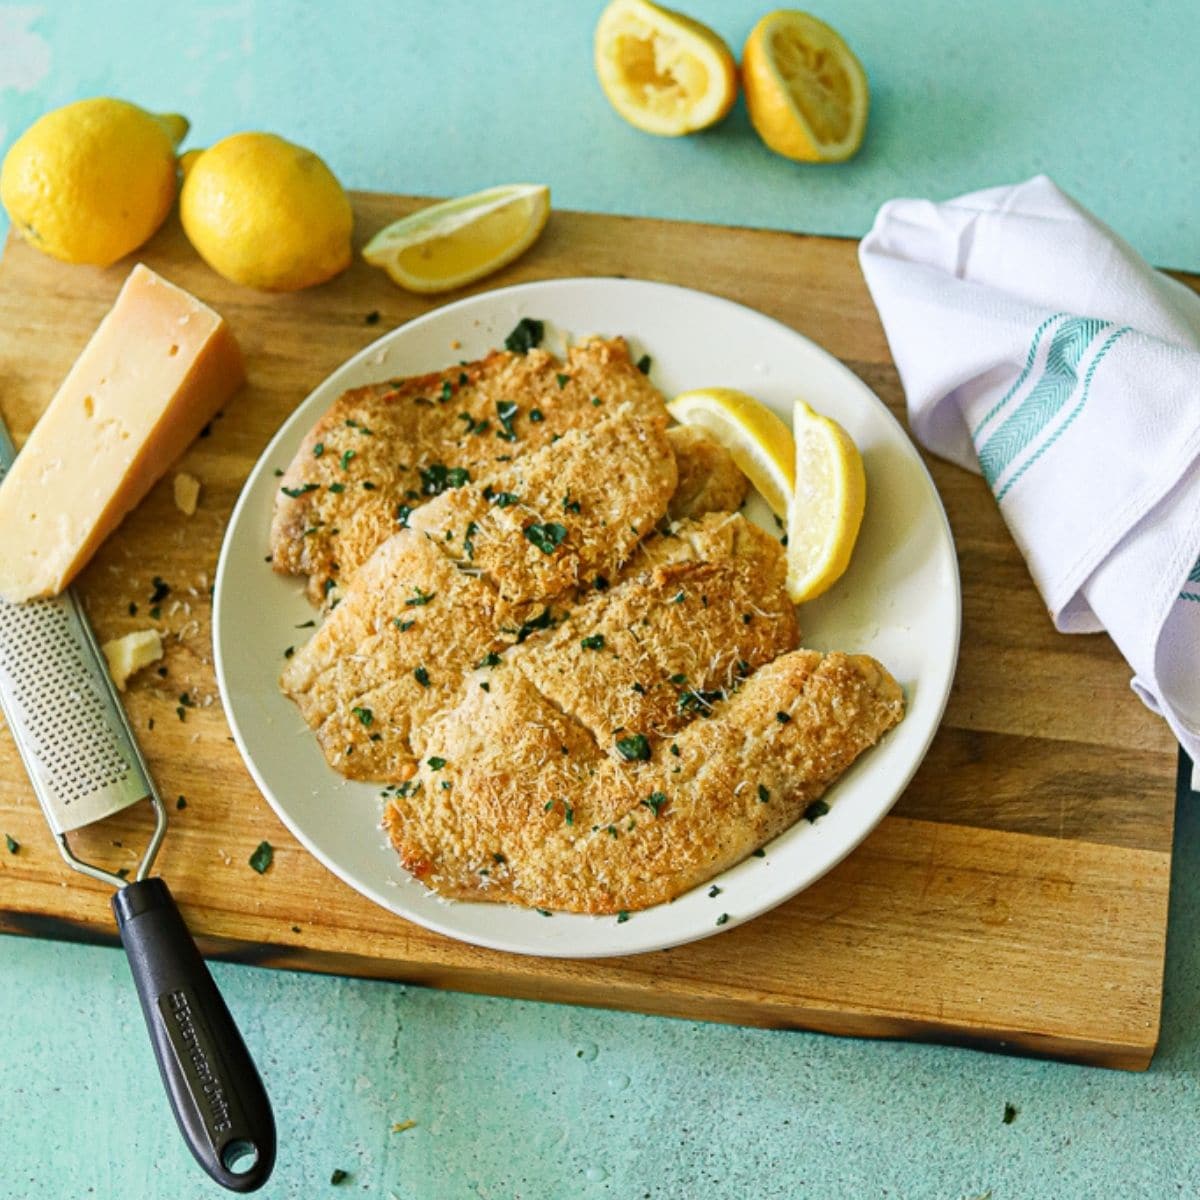 Baked tilapia on a white plate with lemon and fresh parmesan cheese off to the side.